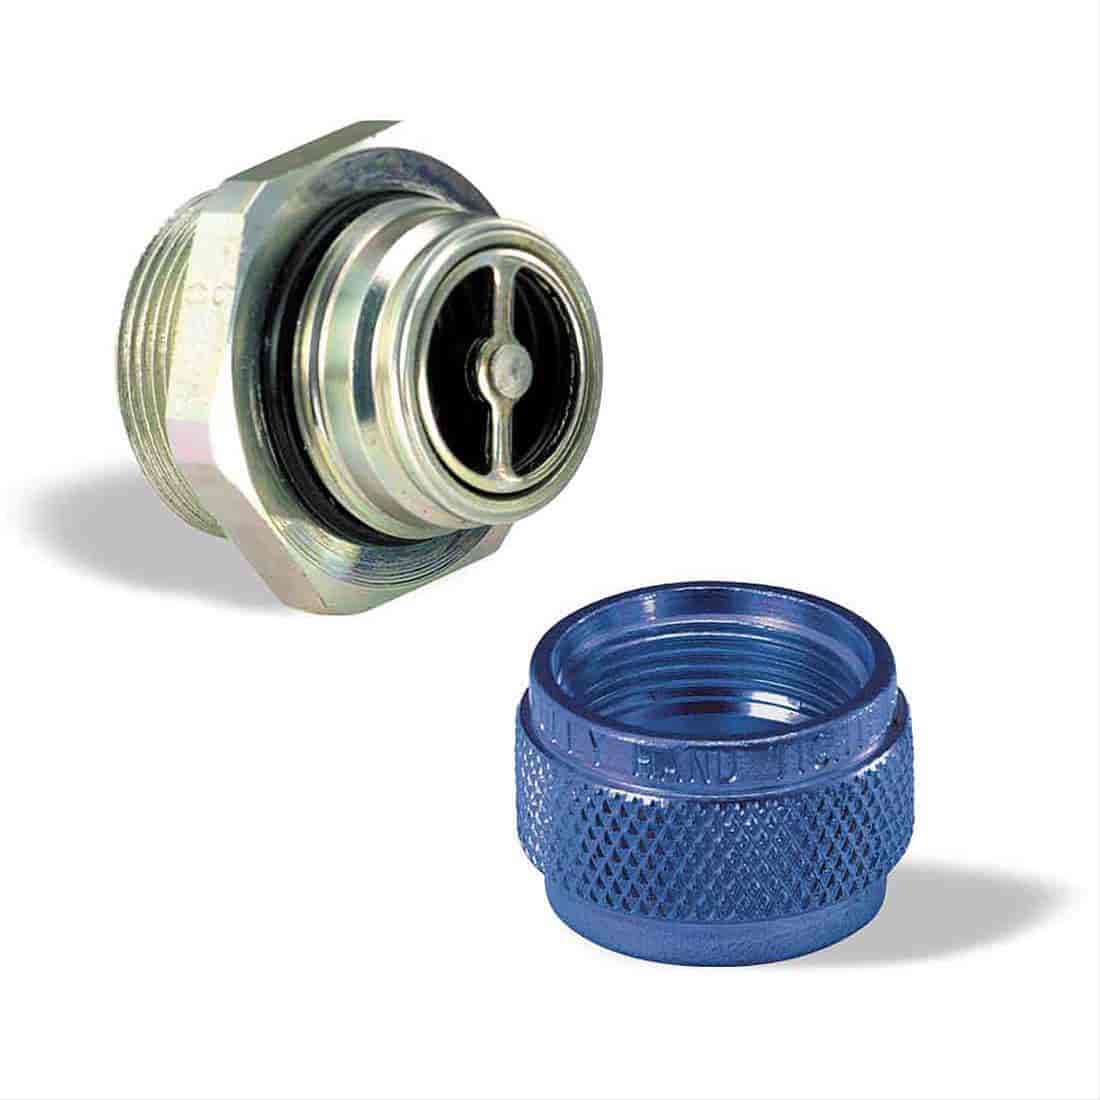 Male Half M22 x 1.5 Thread Size 1.54in.x.96in. 1-1/4in. Hex Size - Quick-Drain Oil Pan Coupling